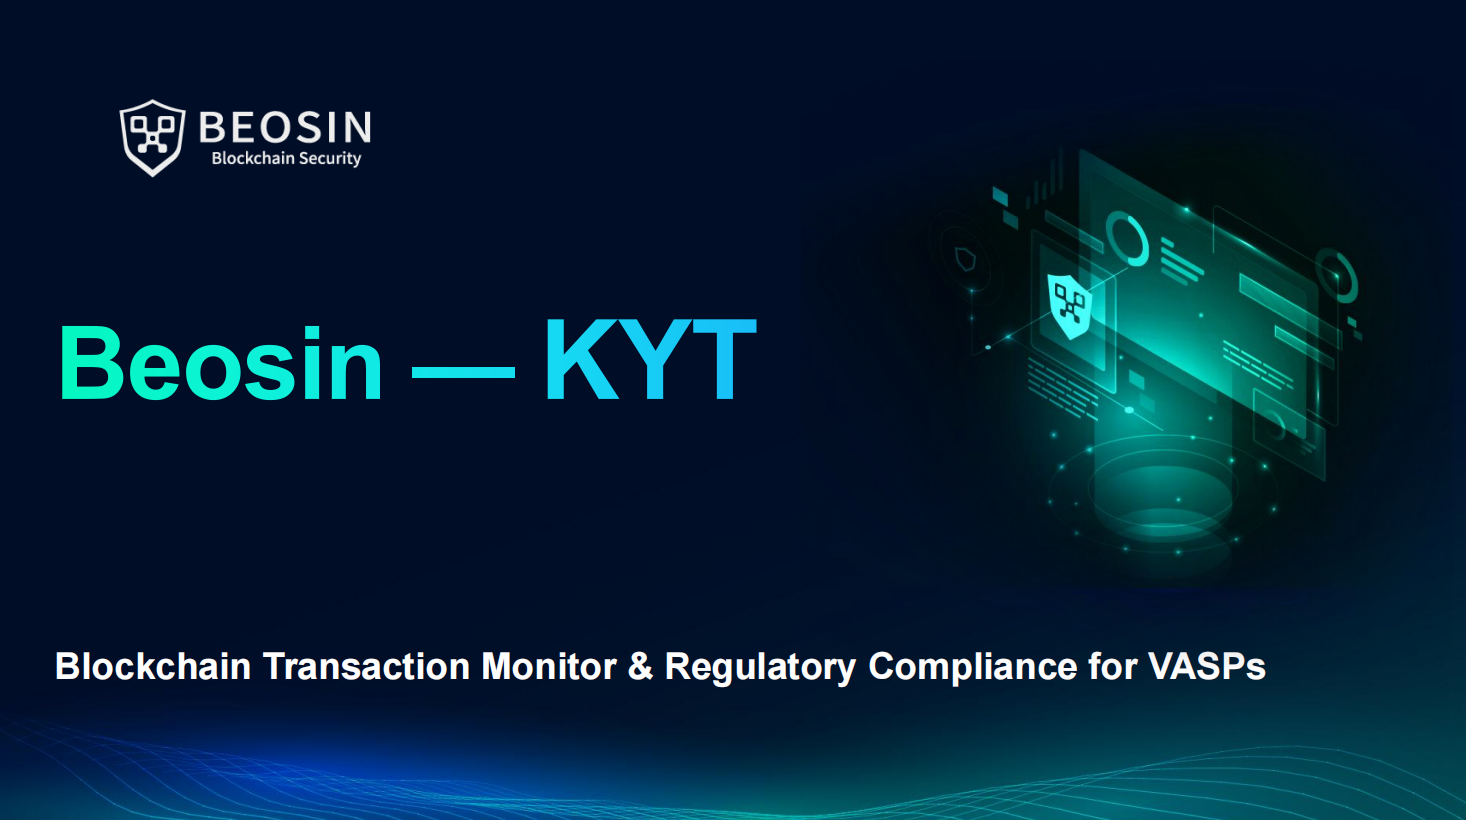 Beosin KYT: an On-chain Expert to Meet All Your AML Needs